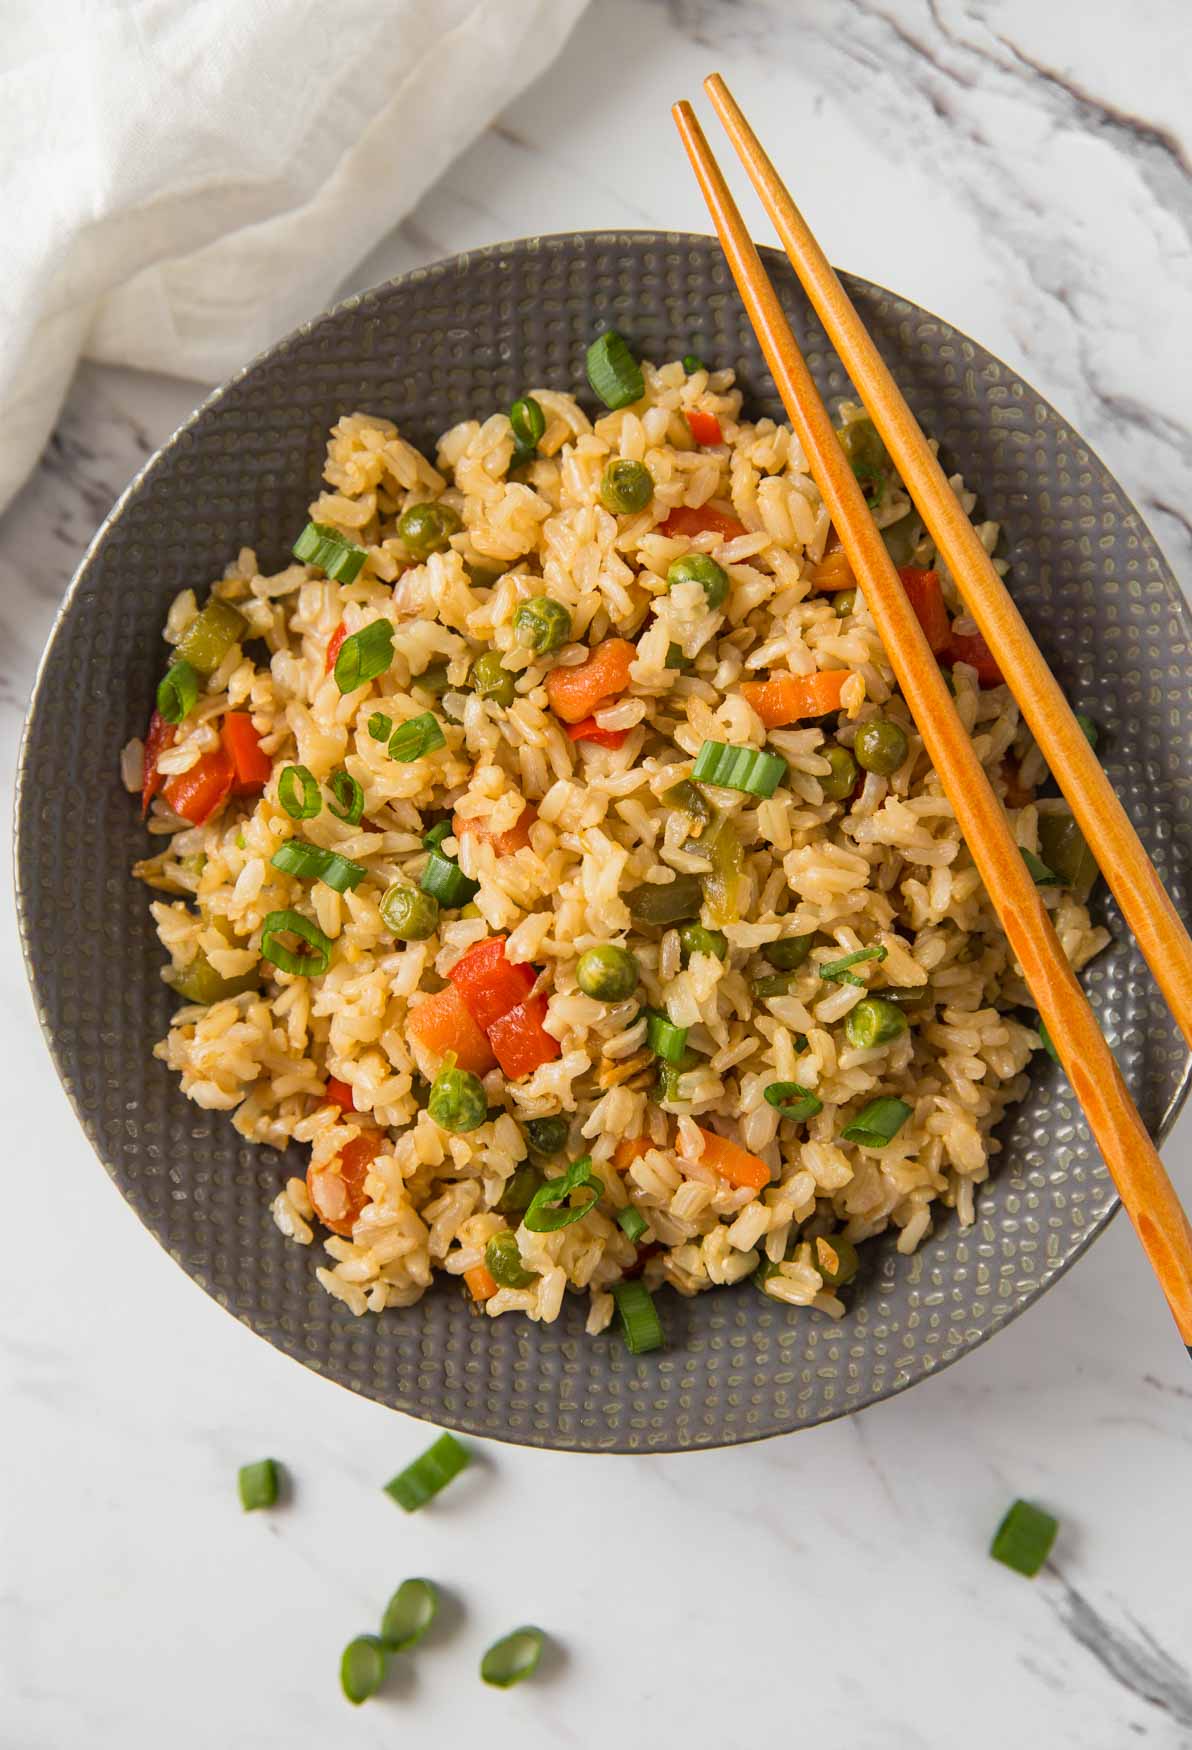 Healthy fried rice in a serving bowl with wooden chopsticks.